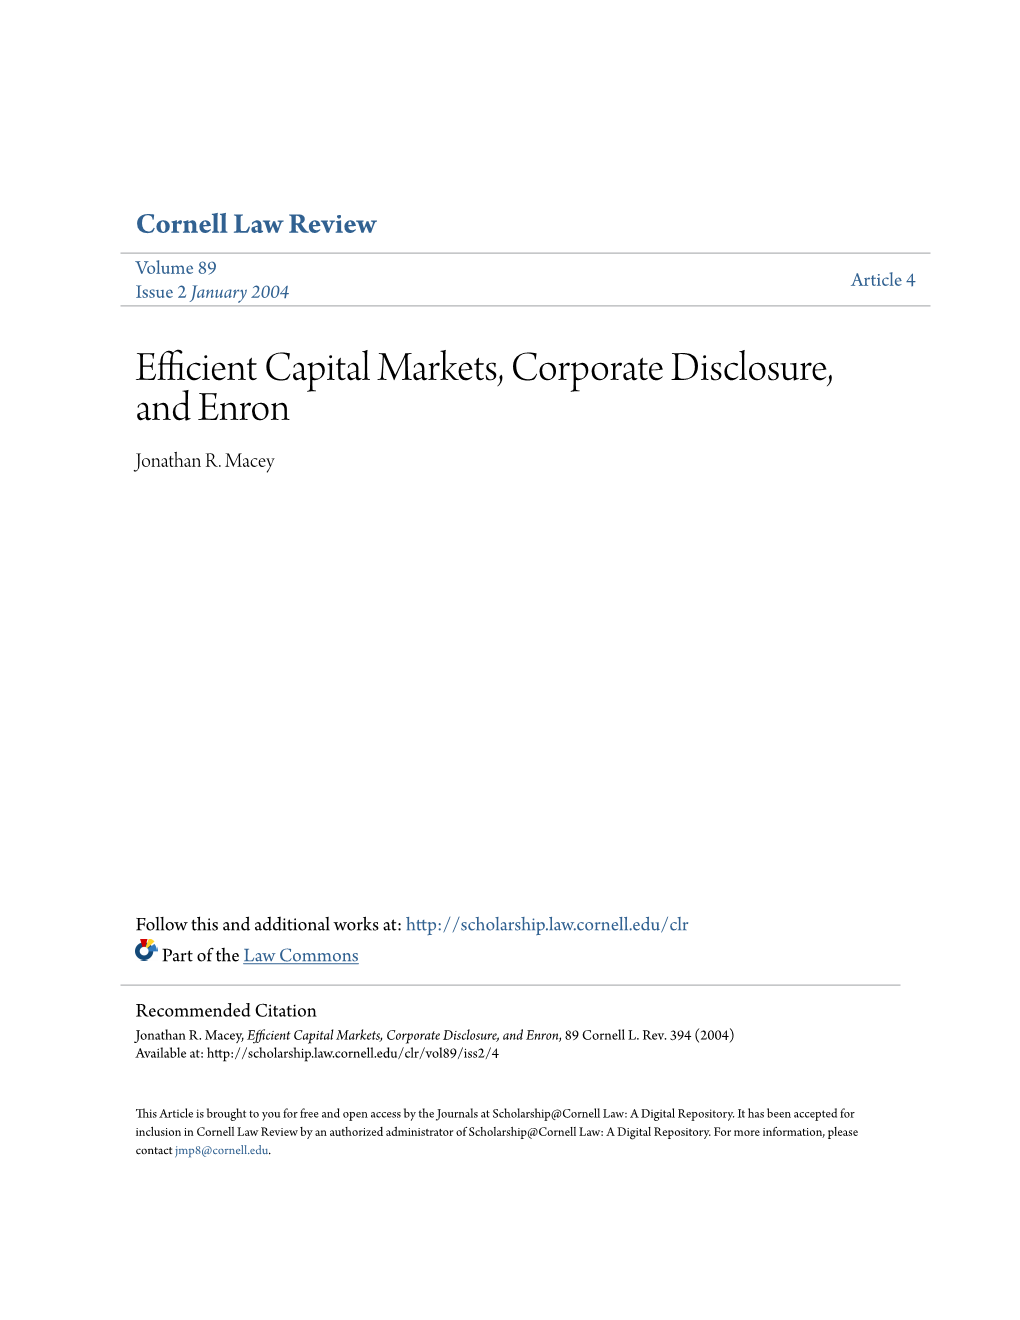 Efficient Capital Markets, Corporate Disclosure, and Enron Jonathan R